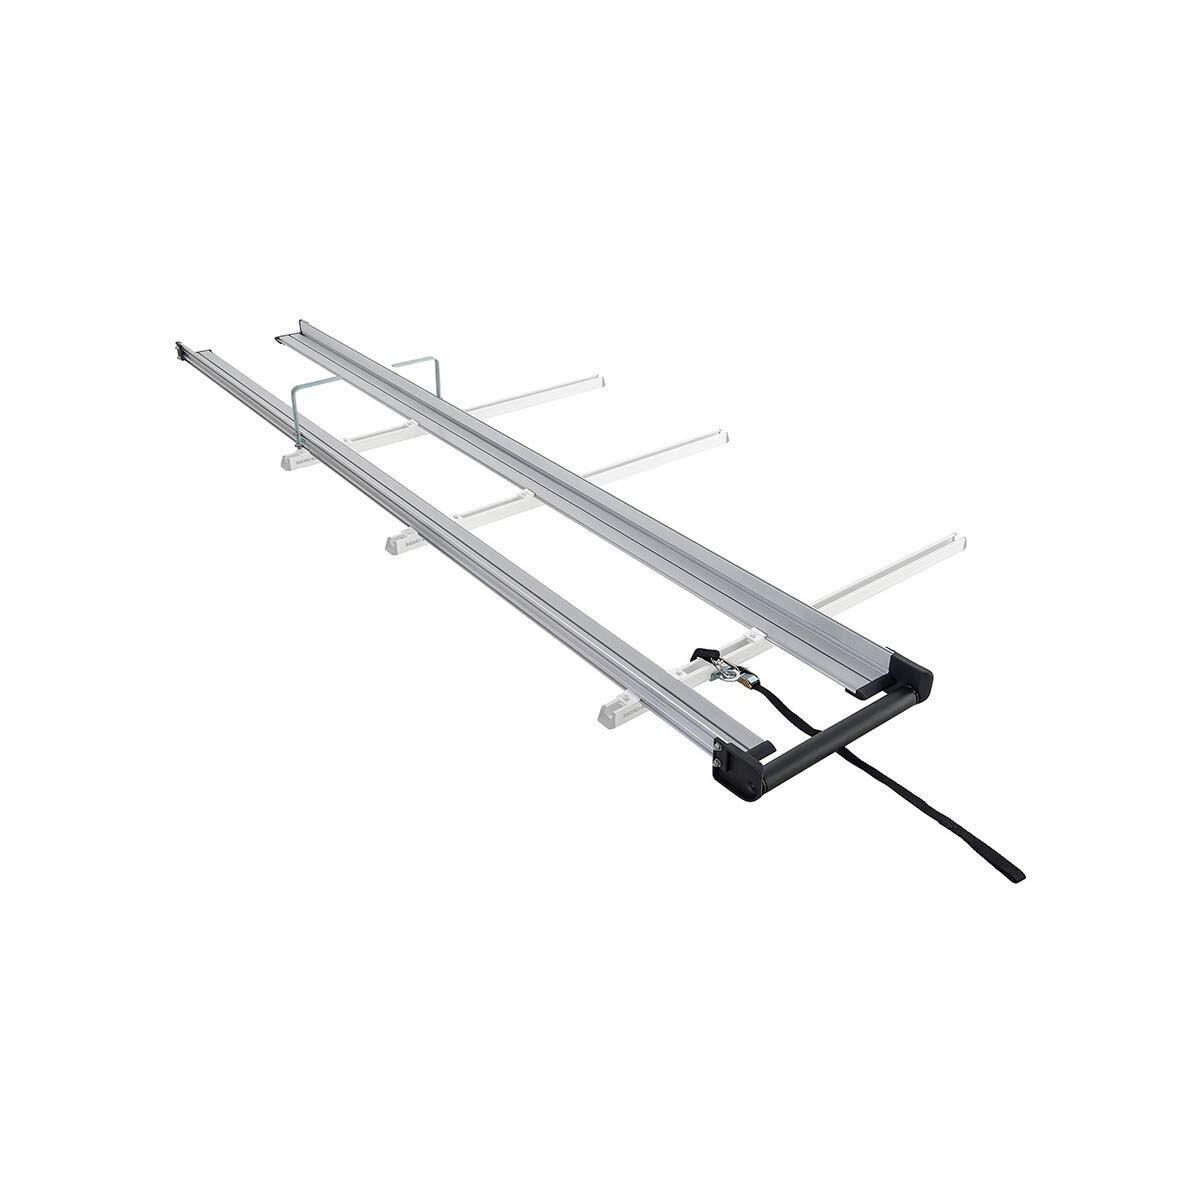 Rhino-Rack 4.0M Csl Ladder Rack System With 470mm Roller Outback Equipment